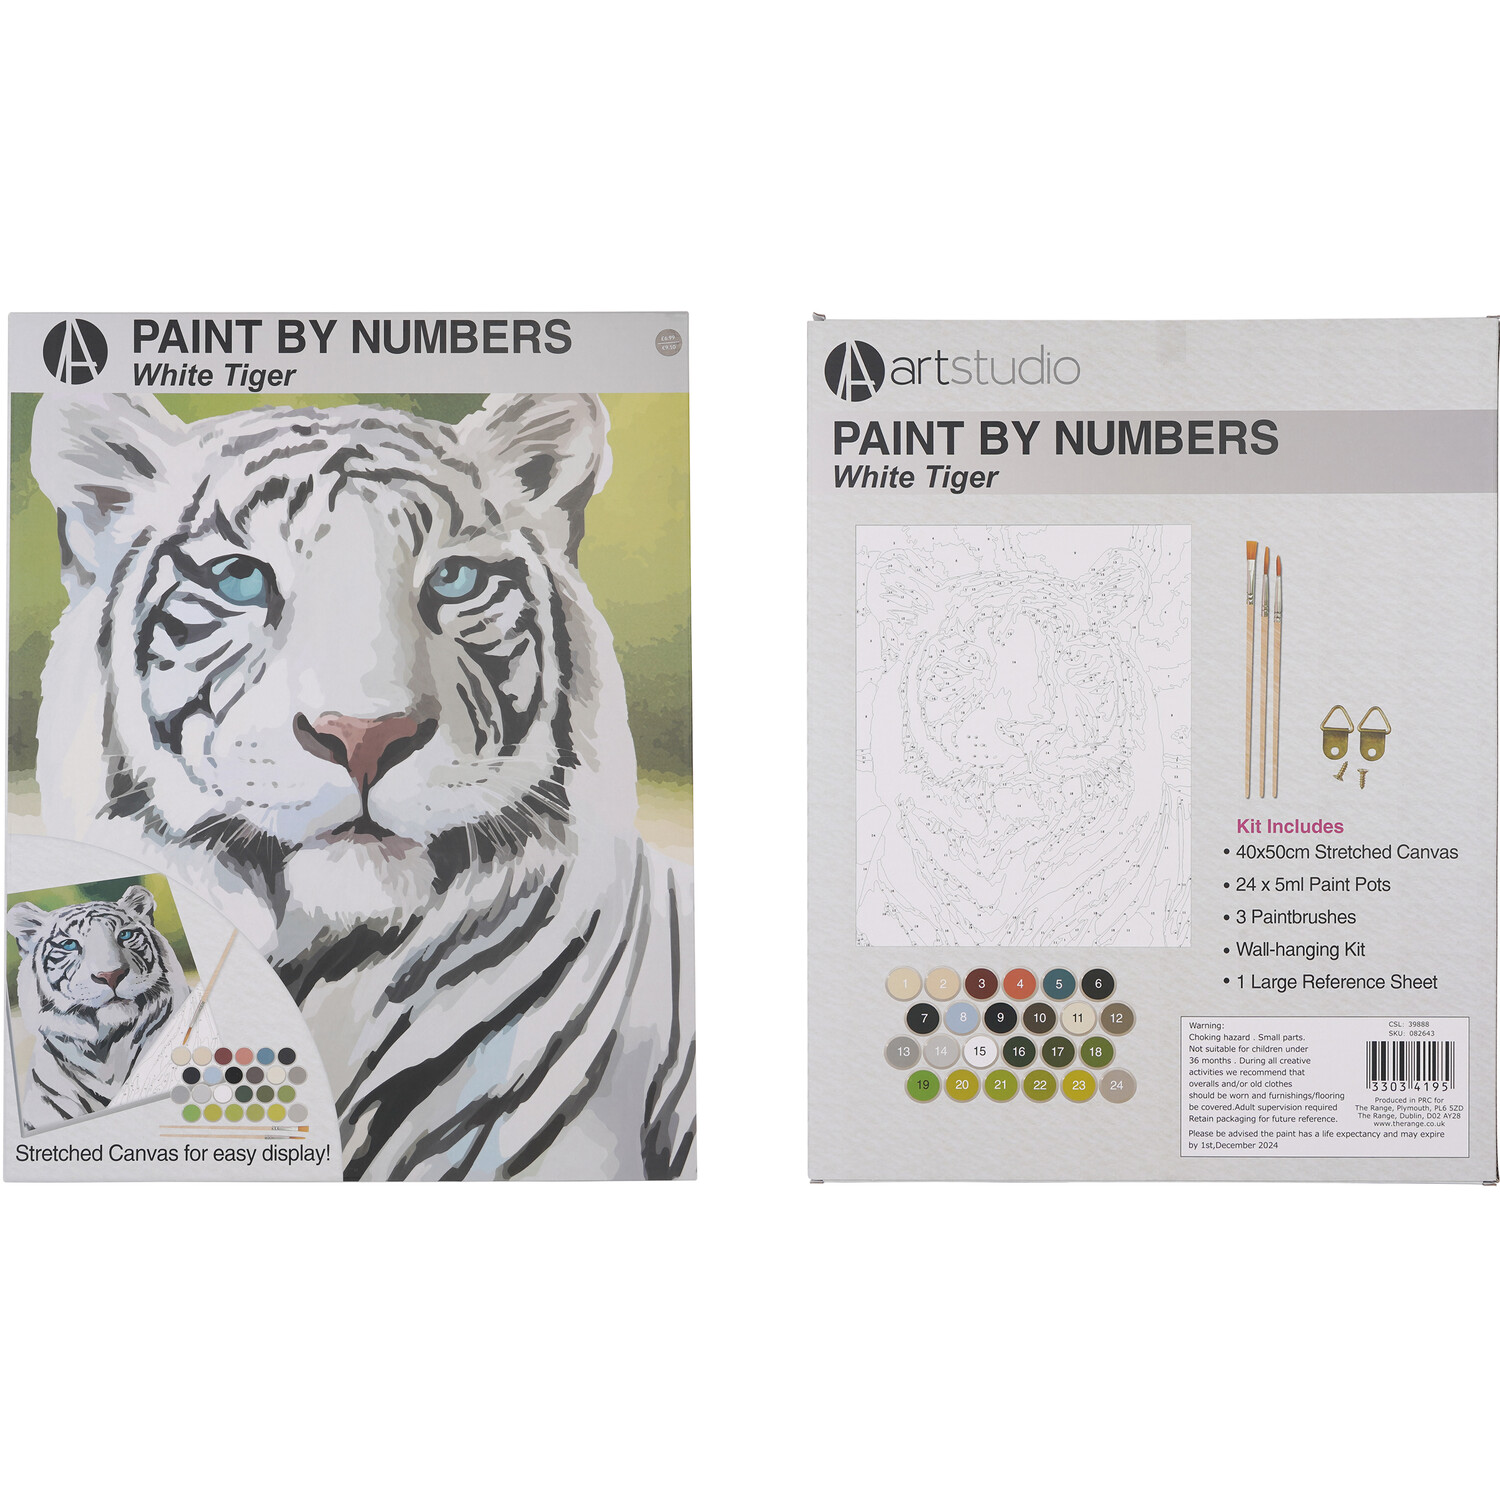 Paint by Numbers Lion or White Tiger Image 2